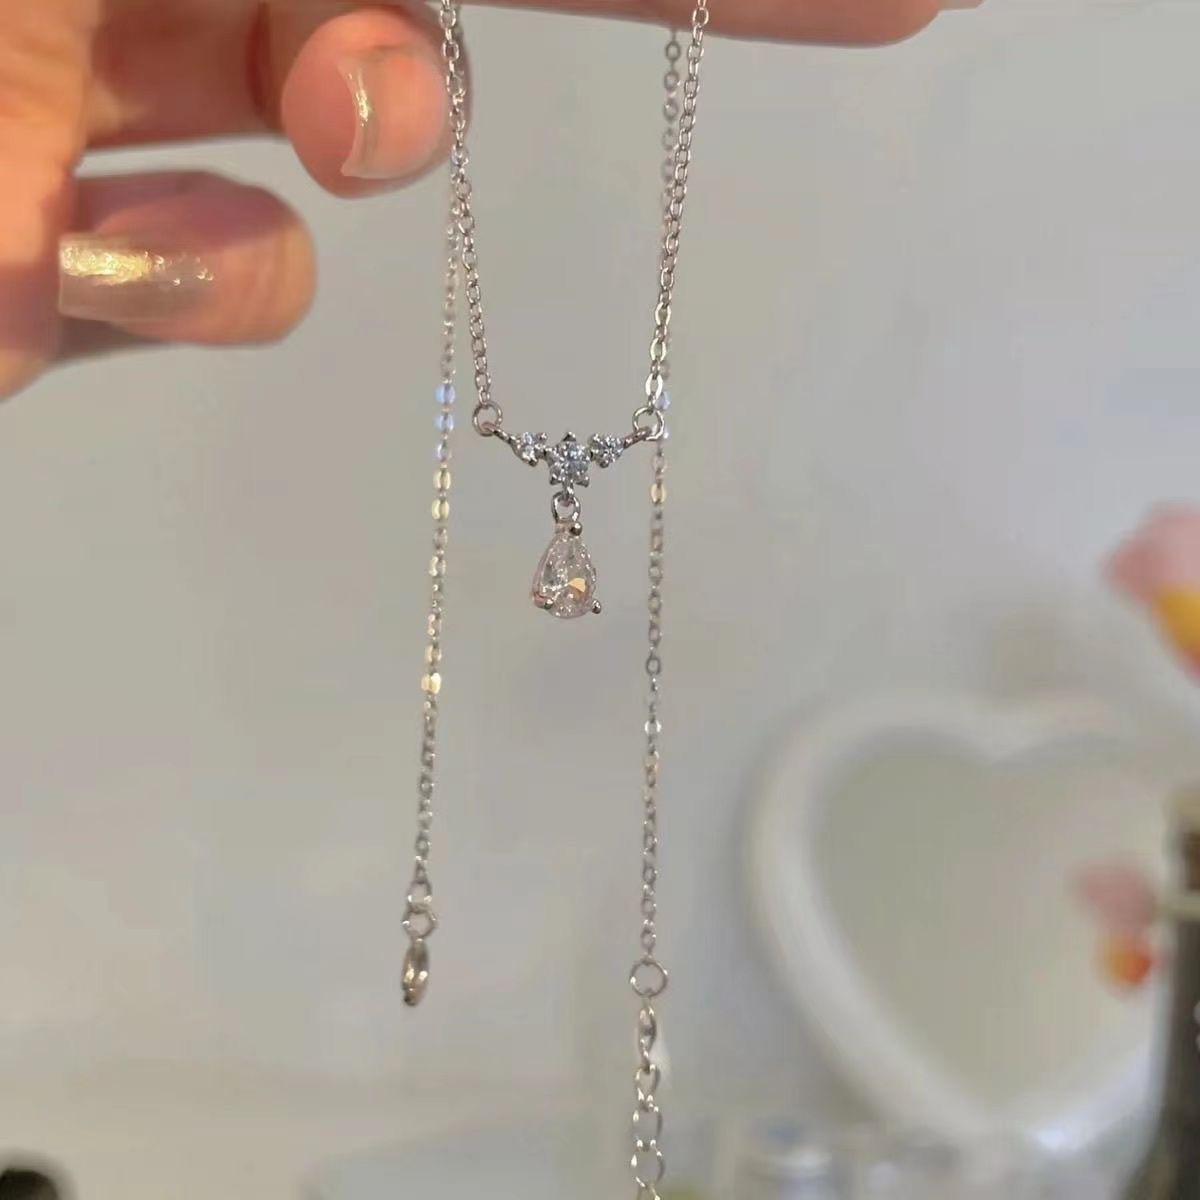 Necklace Female Ins Clavicle Chain Neck Chain Female Butterfly Necklace Light Luxury Minority Advanced Design Sense Student Girlfriends All-Matching